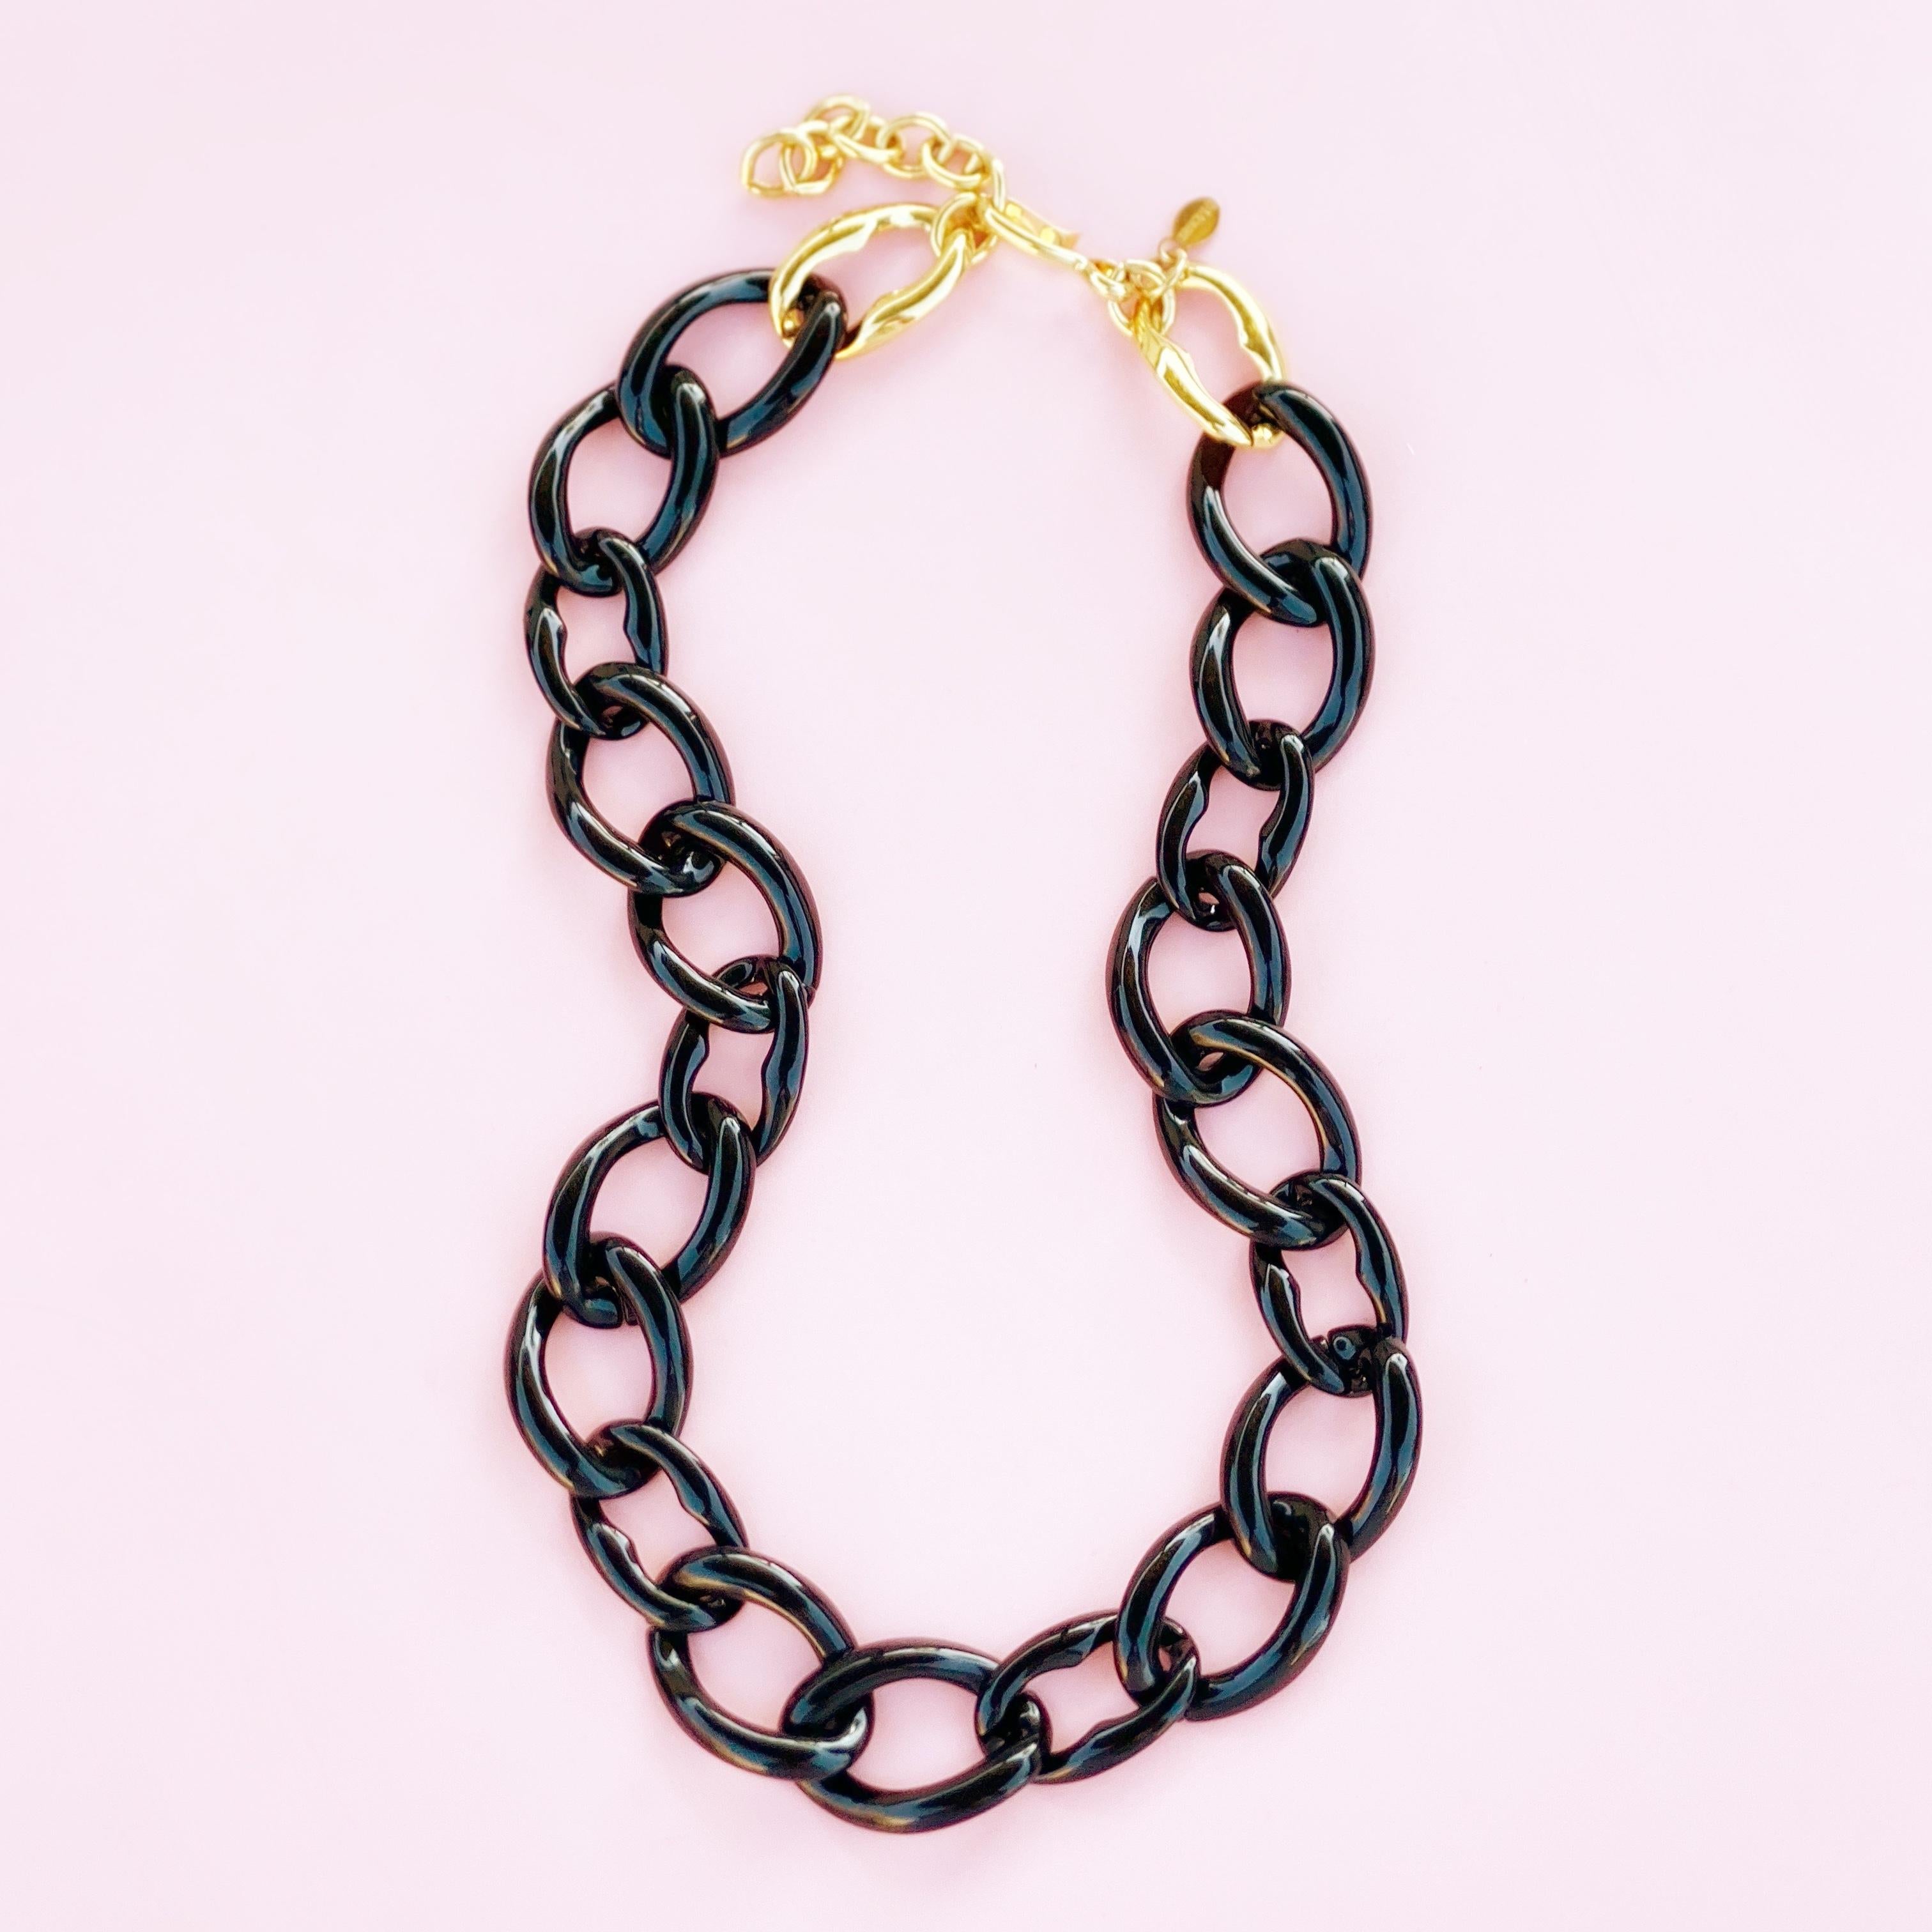 Modern Vintage Black Enamel Chunky Chain Statement Necklace By Monet, 1980s